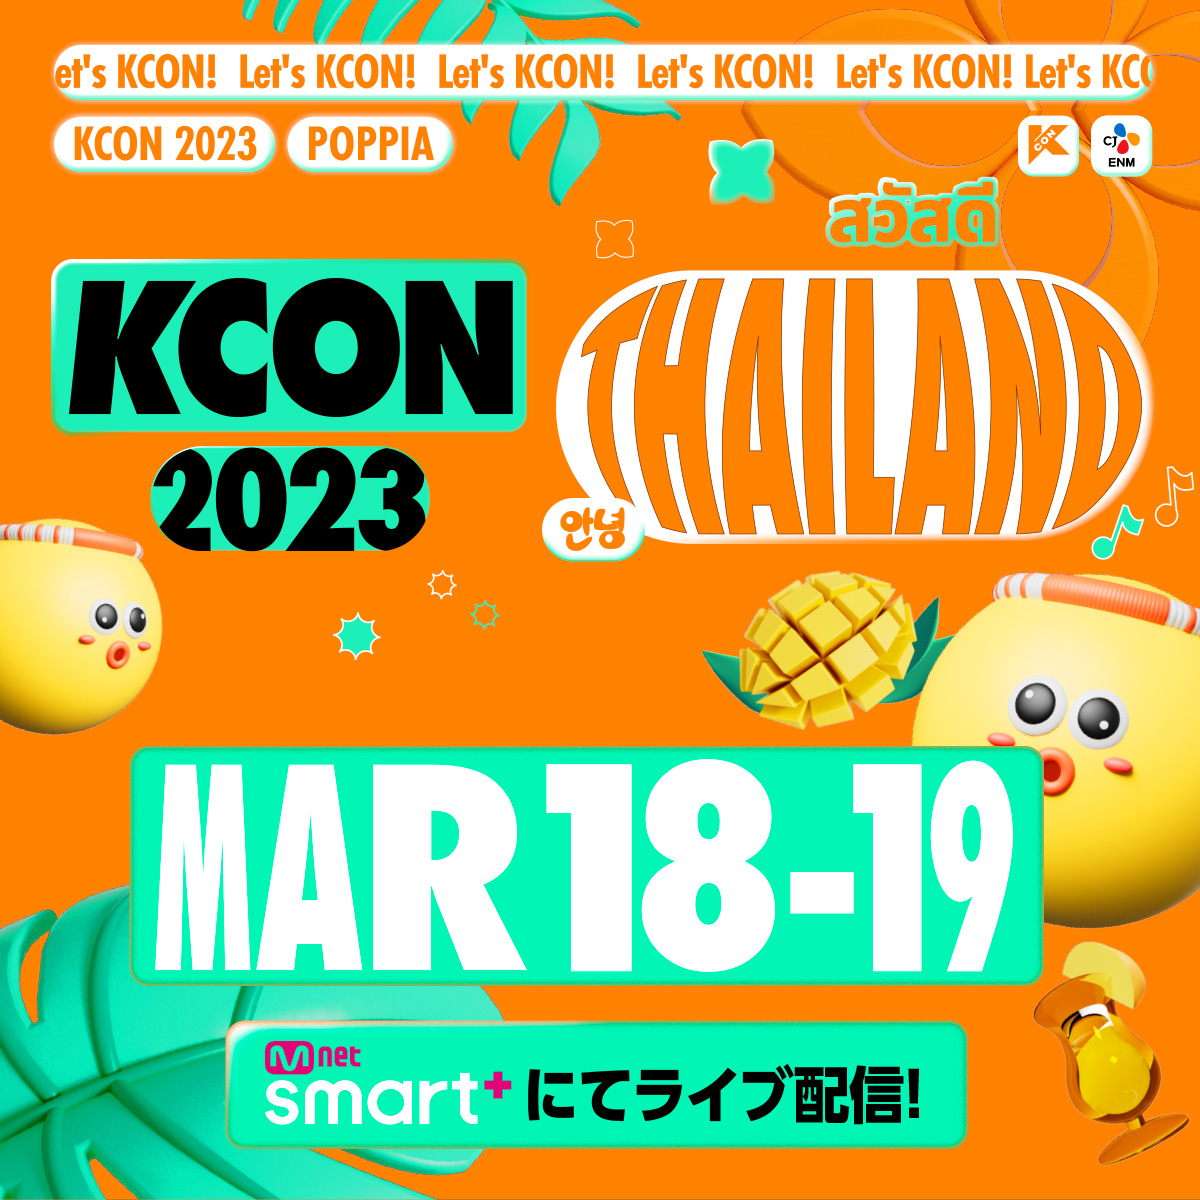 KCON 2023 Thailand How to Watch, Date, Venue, Lineup, Ticket Sales